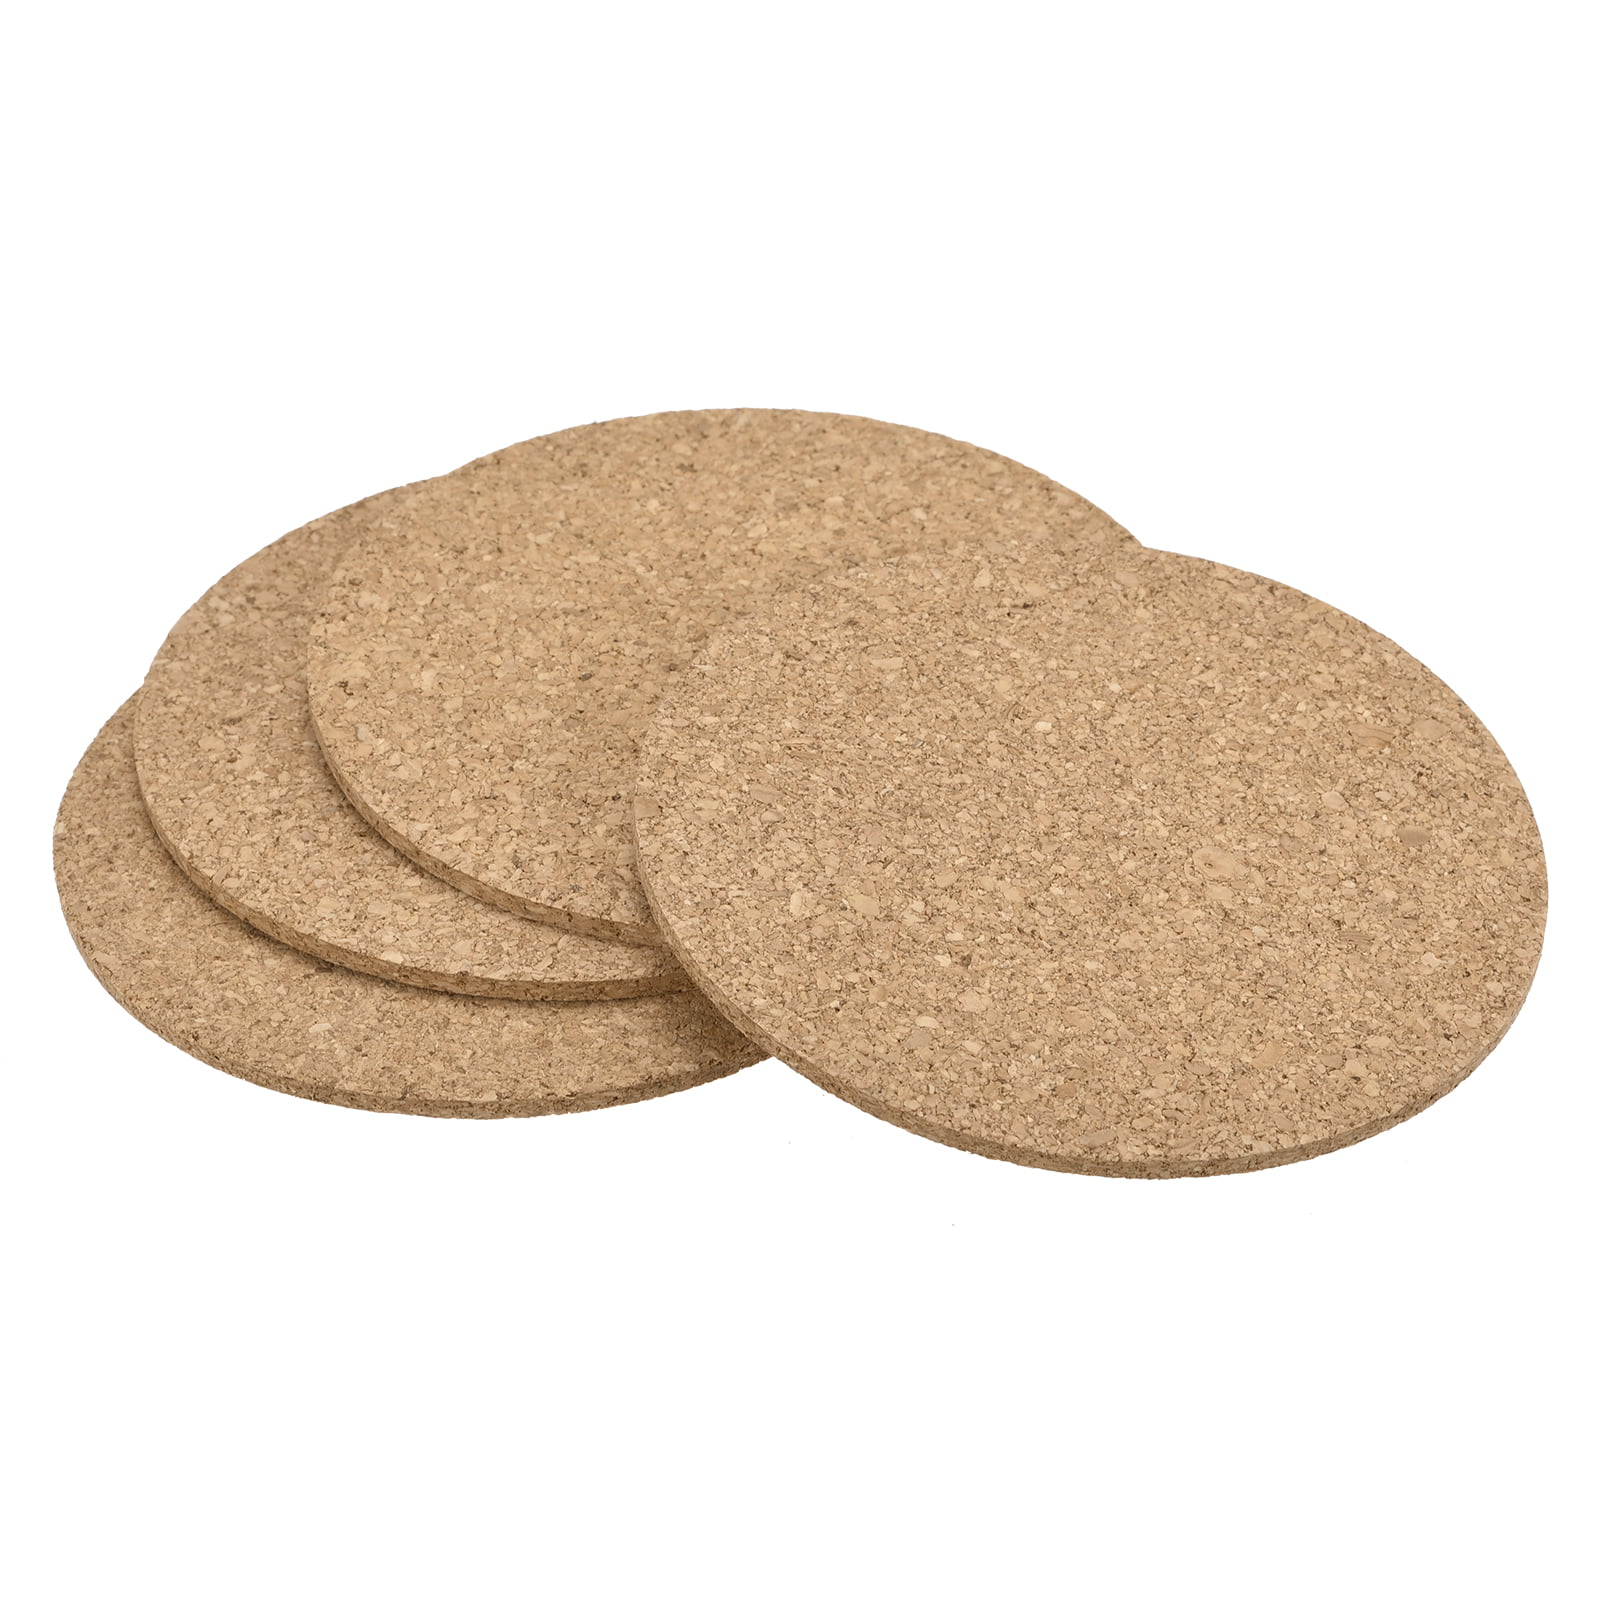 Ving 10 Pack Round Cork Coasters 3.9 inch Diameter for Cold Drinks Wine Glasses Plants Cups Mugs for Laser Engraving Hand Paint, Size: 100mm x 5mm (